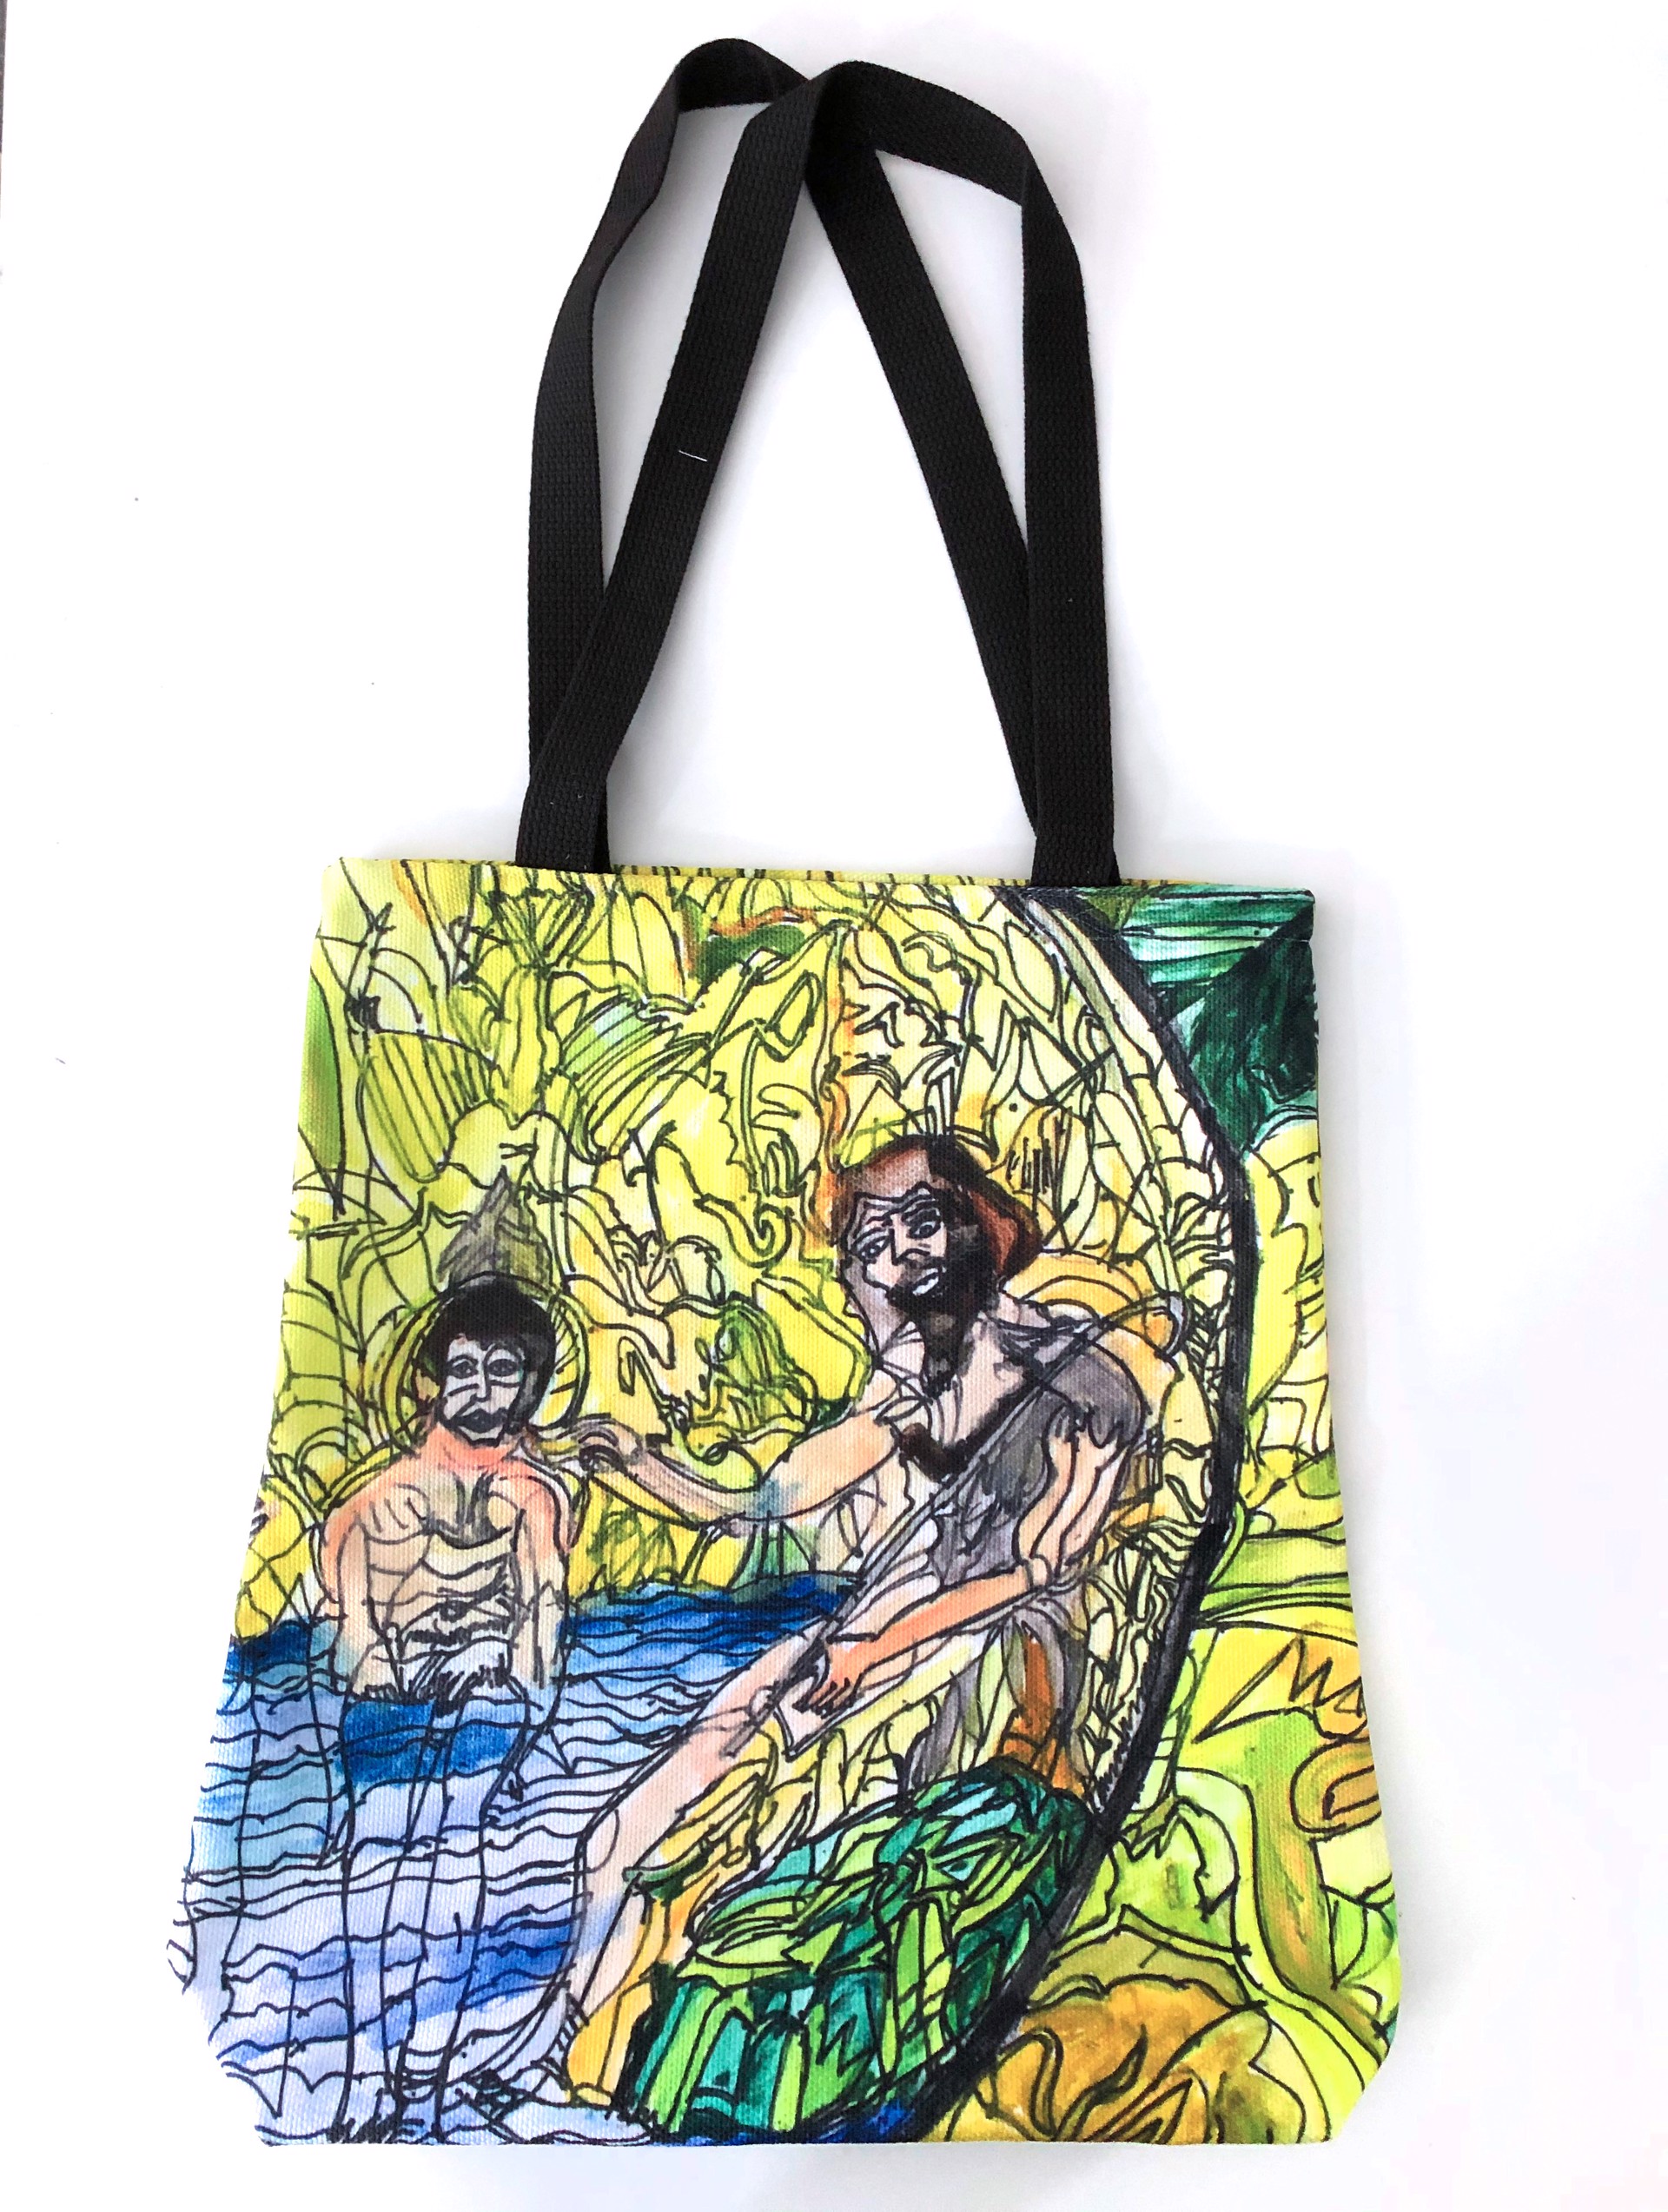 Tote Bag ("Washing Up" by Raymond Lewis) by Art Enables Merchandise